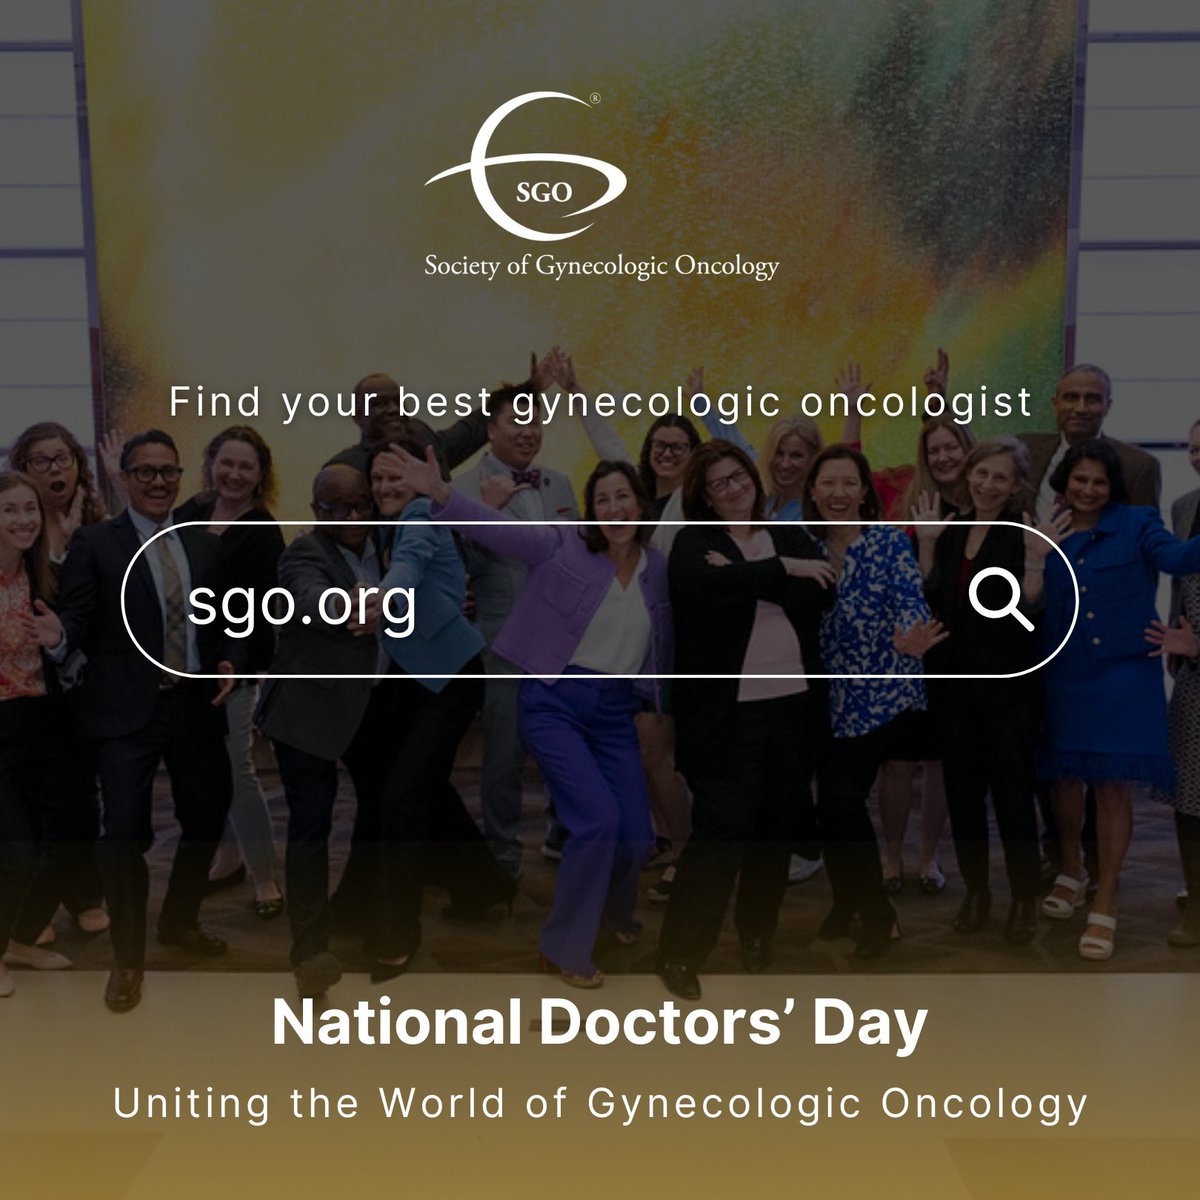 Happy National Doctors' Day to our incredible members! Thank you for your expertise and collaborative efforts that drive progress in the fight against gynecologic cancers and your commitment to better health for all women and TGNC (transgender/gender non-conforming) patients.